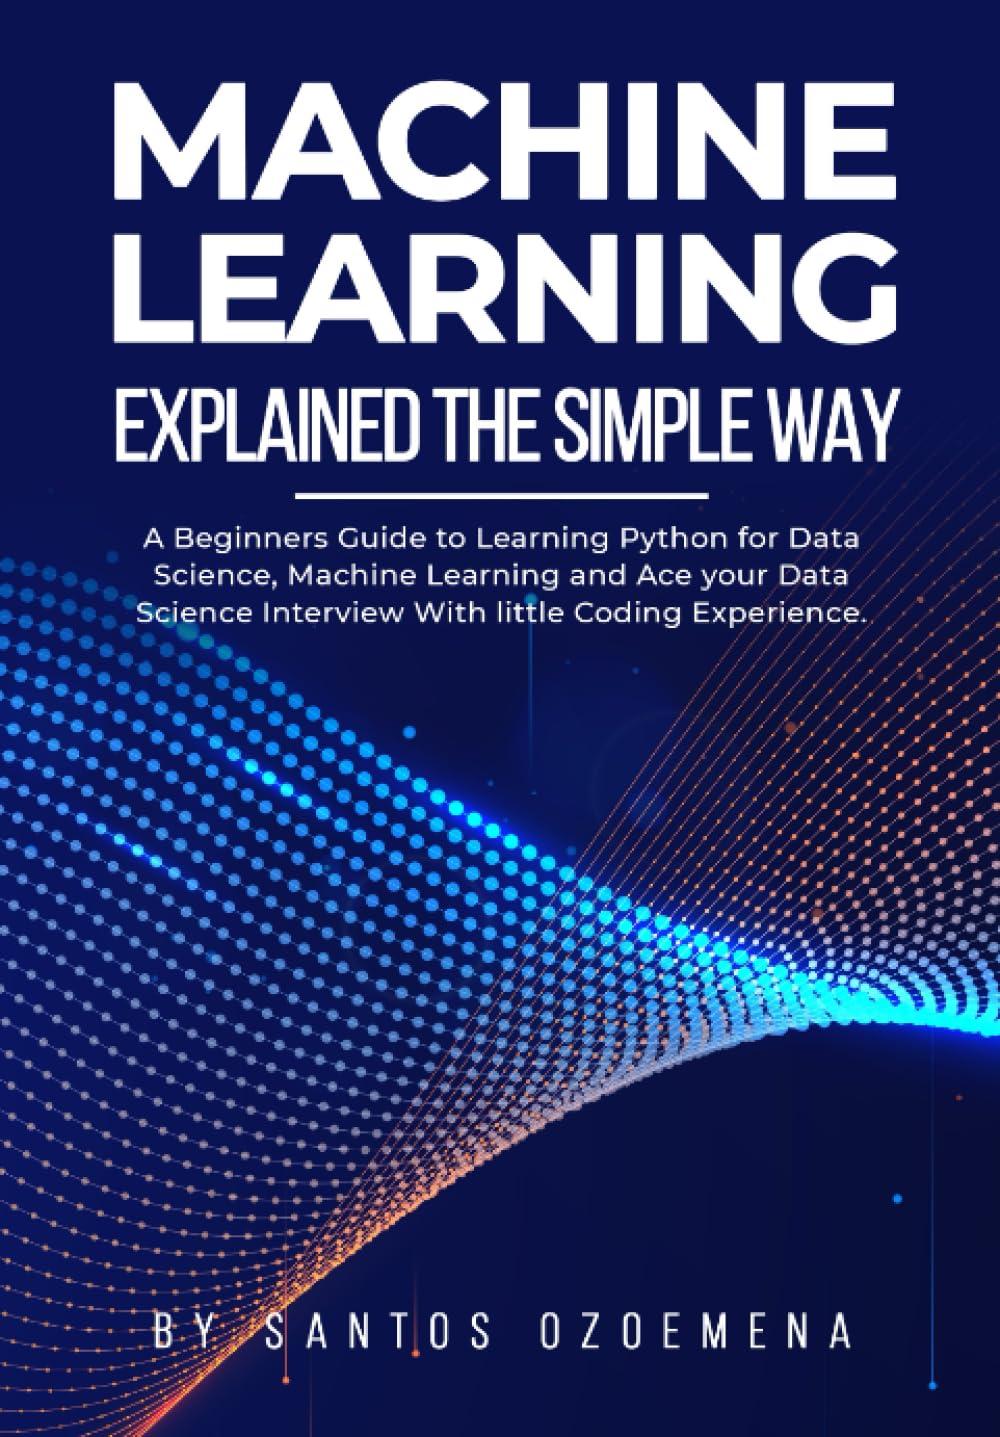 Machine Learning Explained The Simple Way  A Beginners Guide To Learning Python For Data Science  Machine Learning And Ace Your Data Science Interview With Little Coding Experience